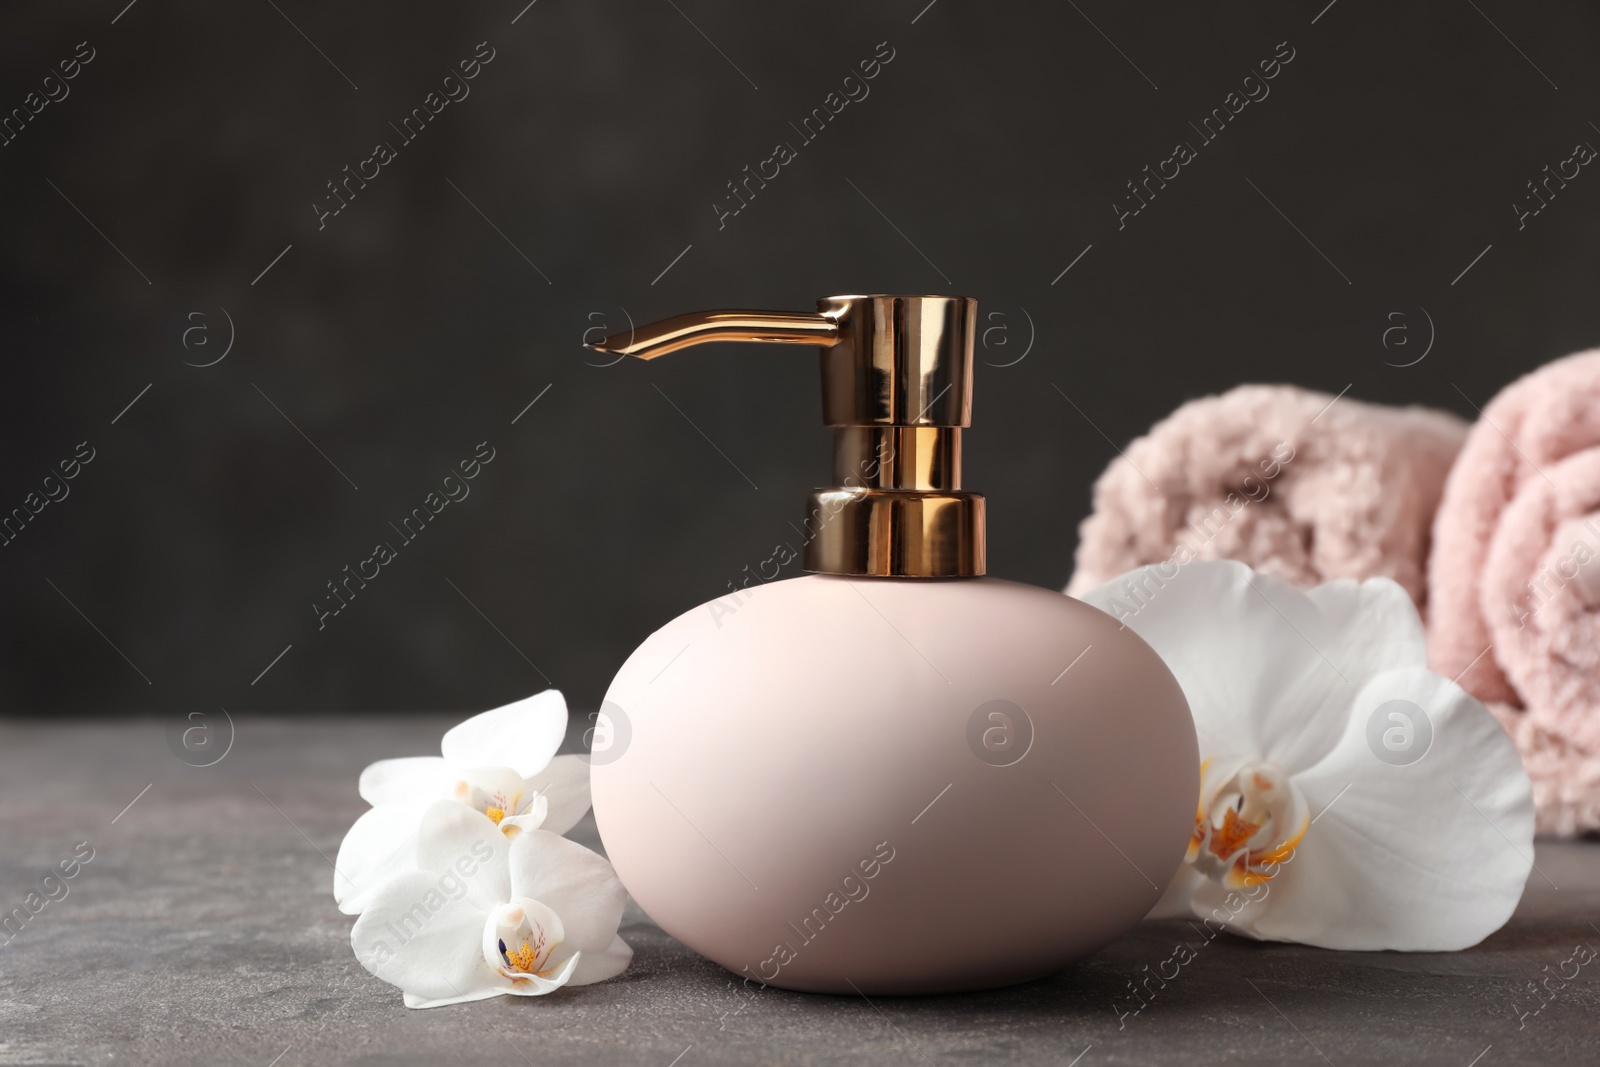 Photo of New stylish soap dispenser with flowers and towels on table